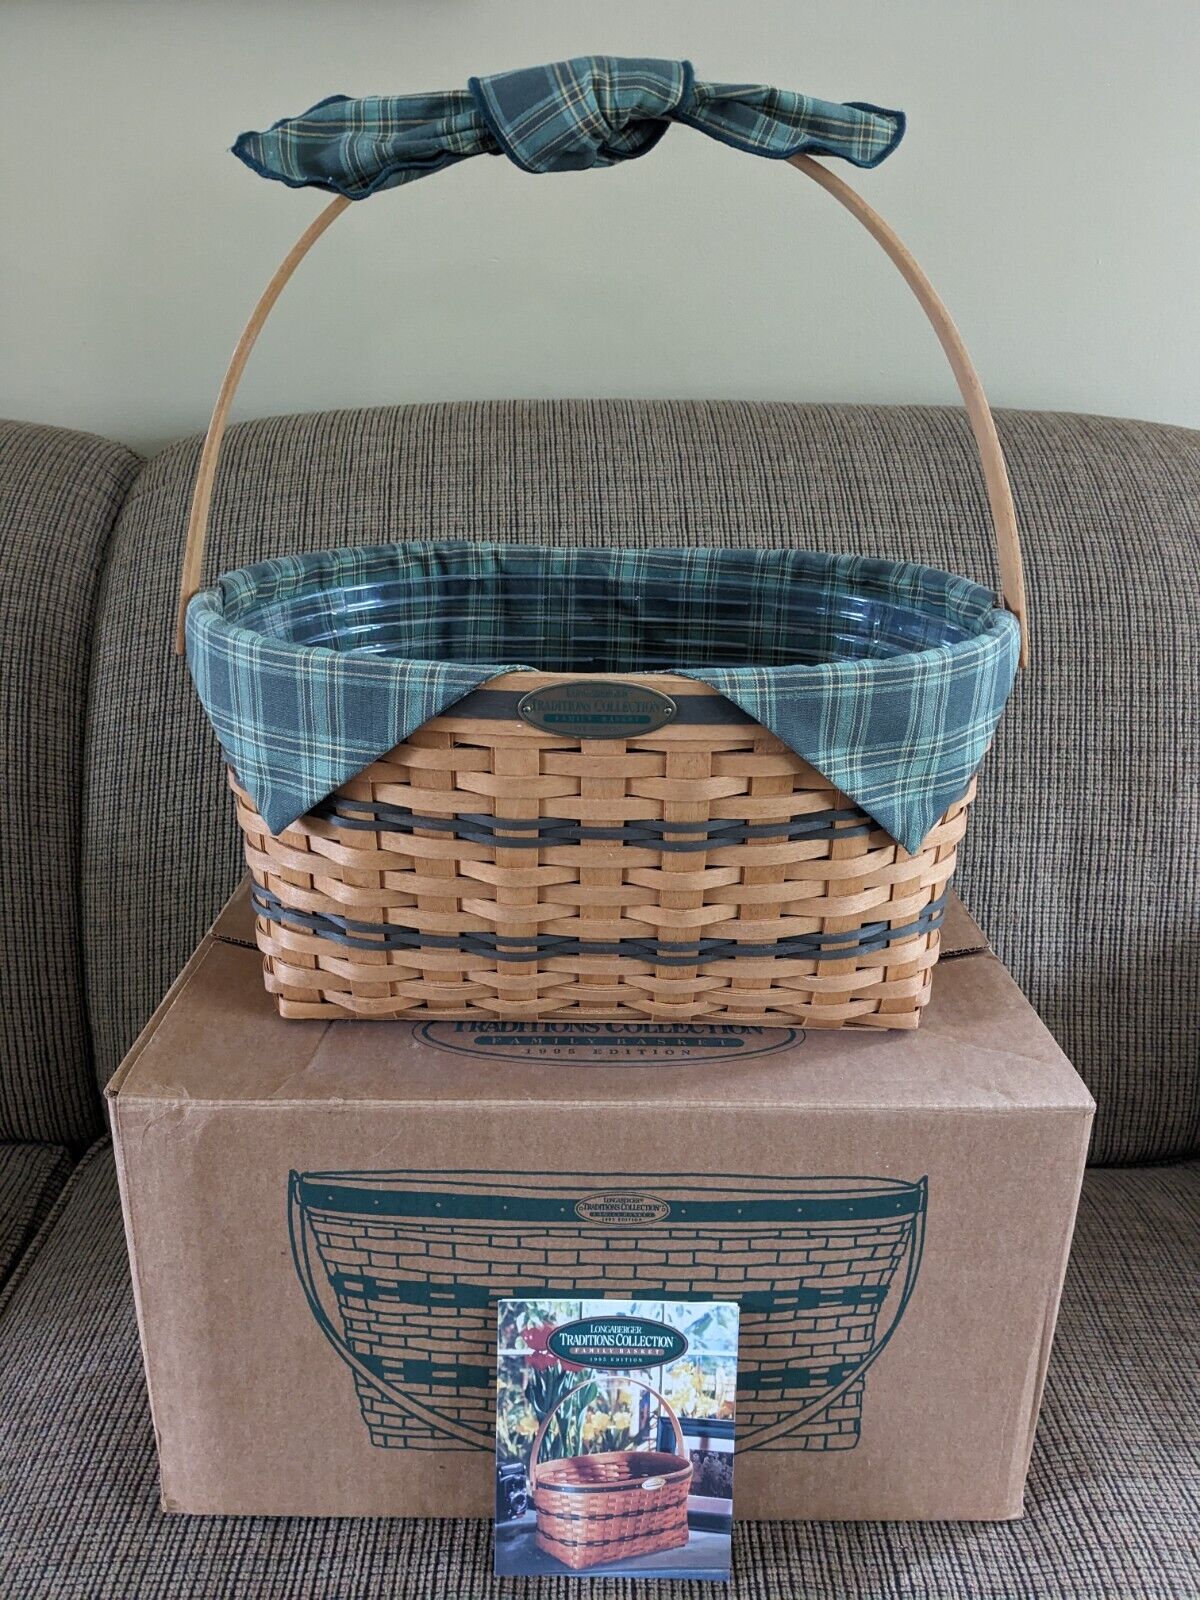 Longaberger 1995 Traditions Collection Family Basket - SIGNED